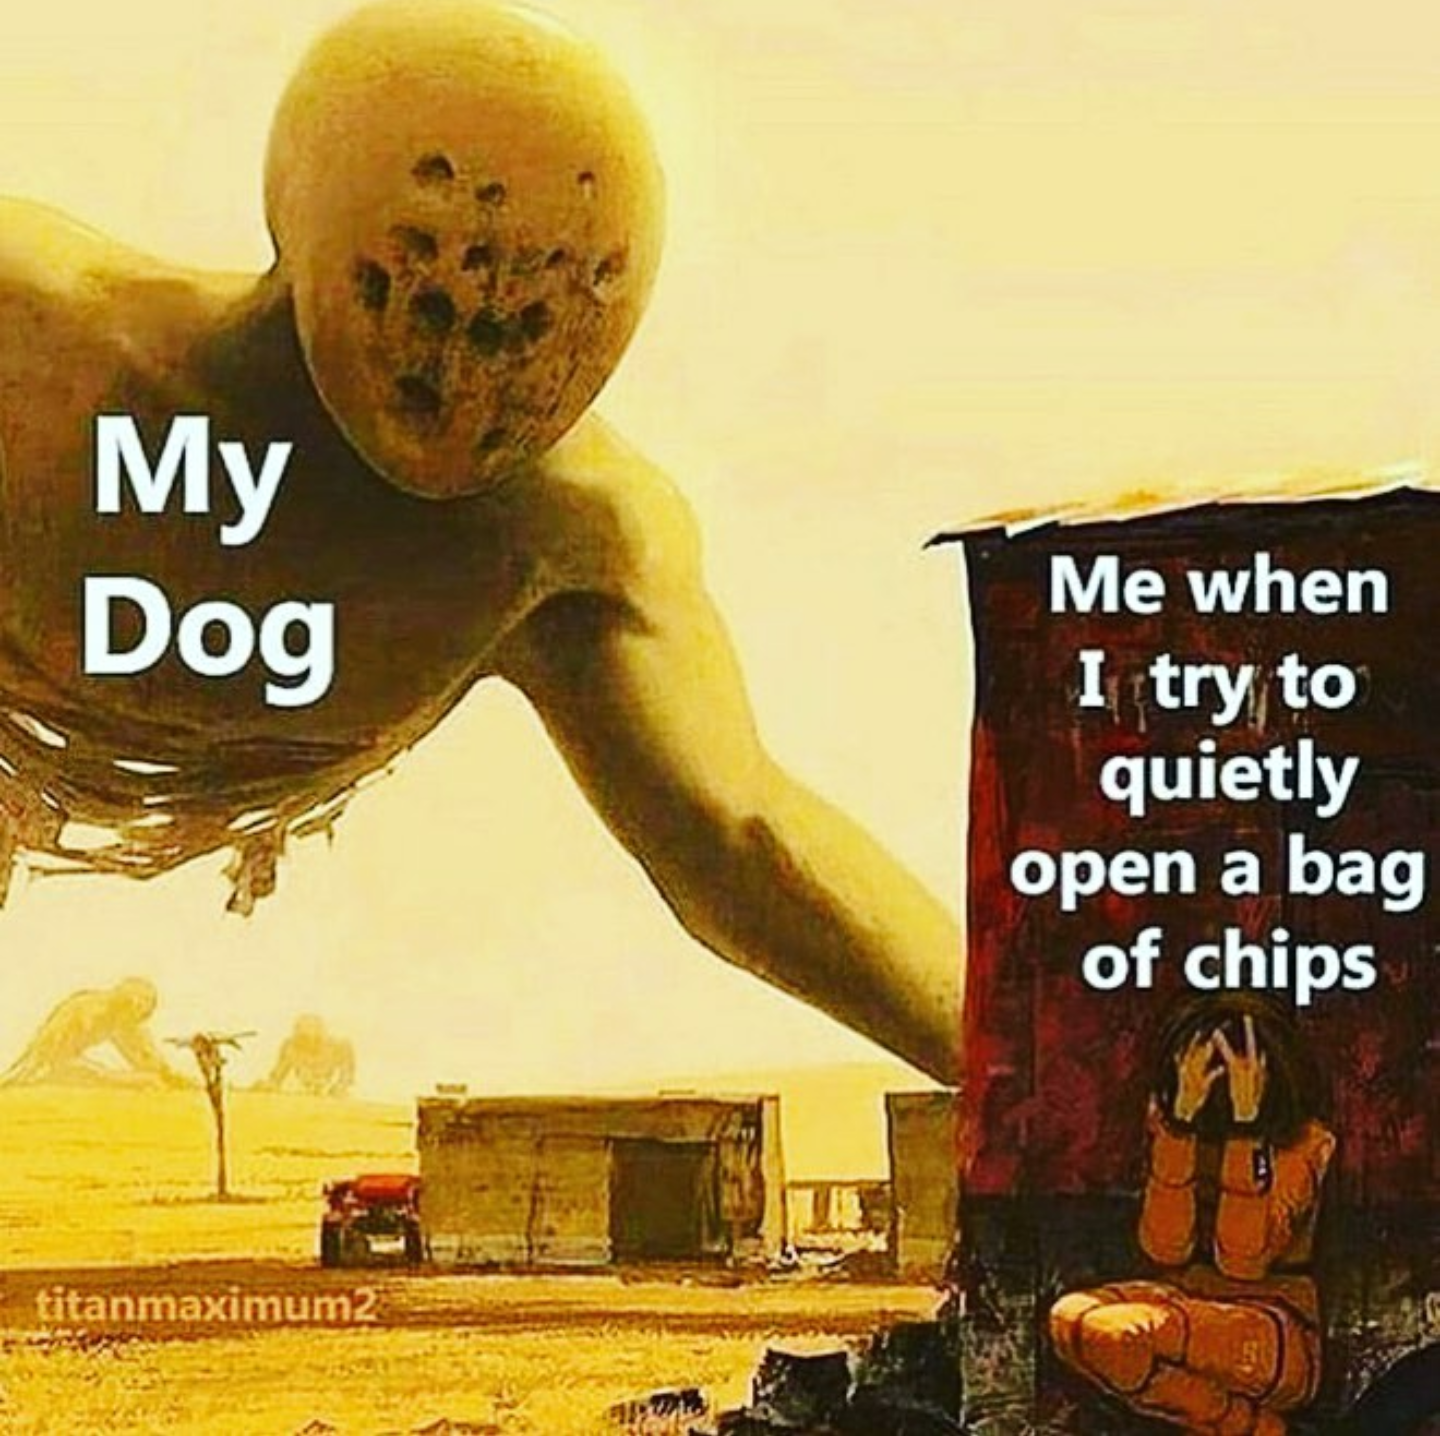 Image labeling meme about my dog and when I try to eat some chips